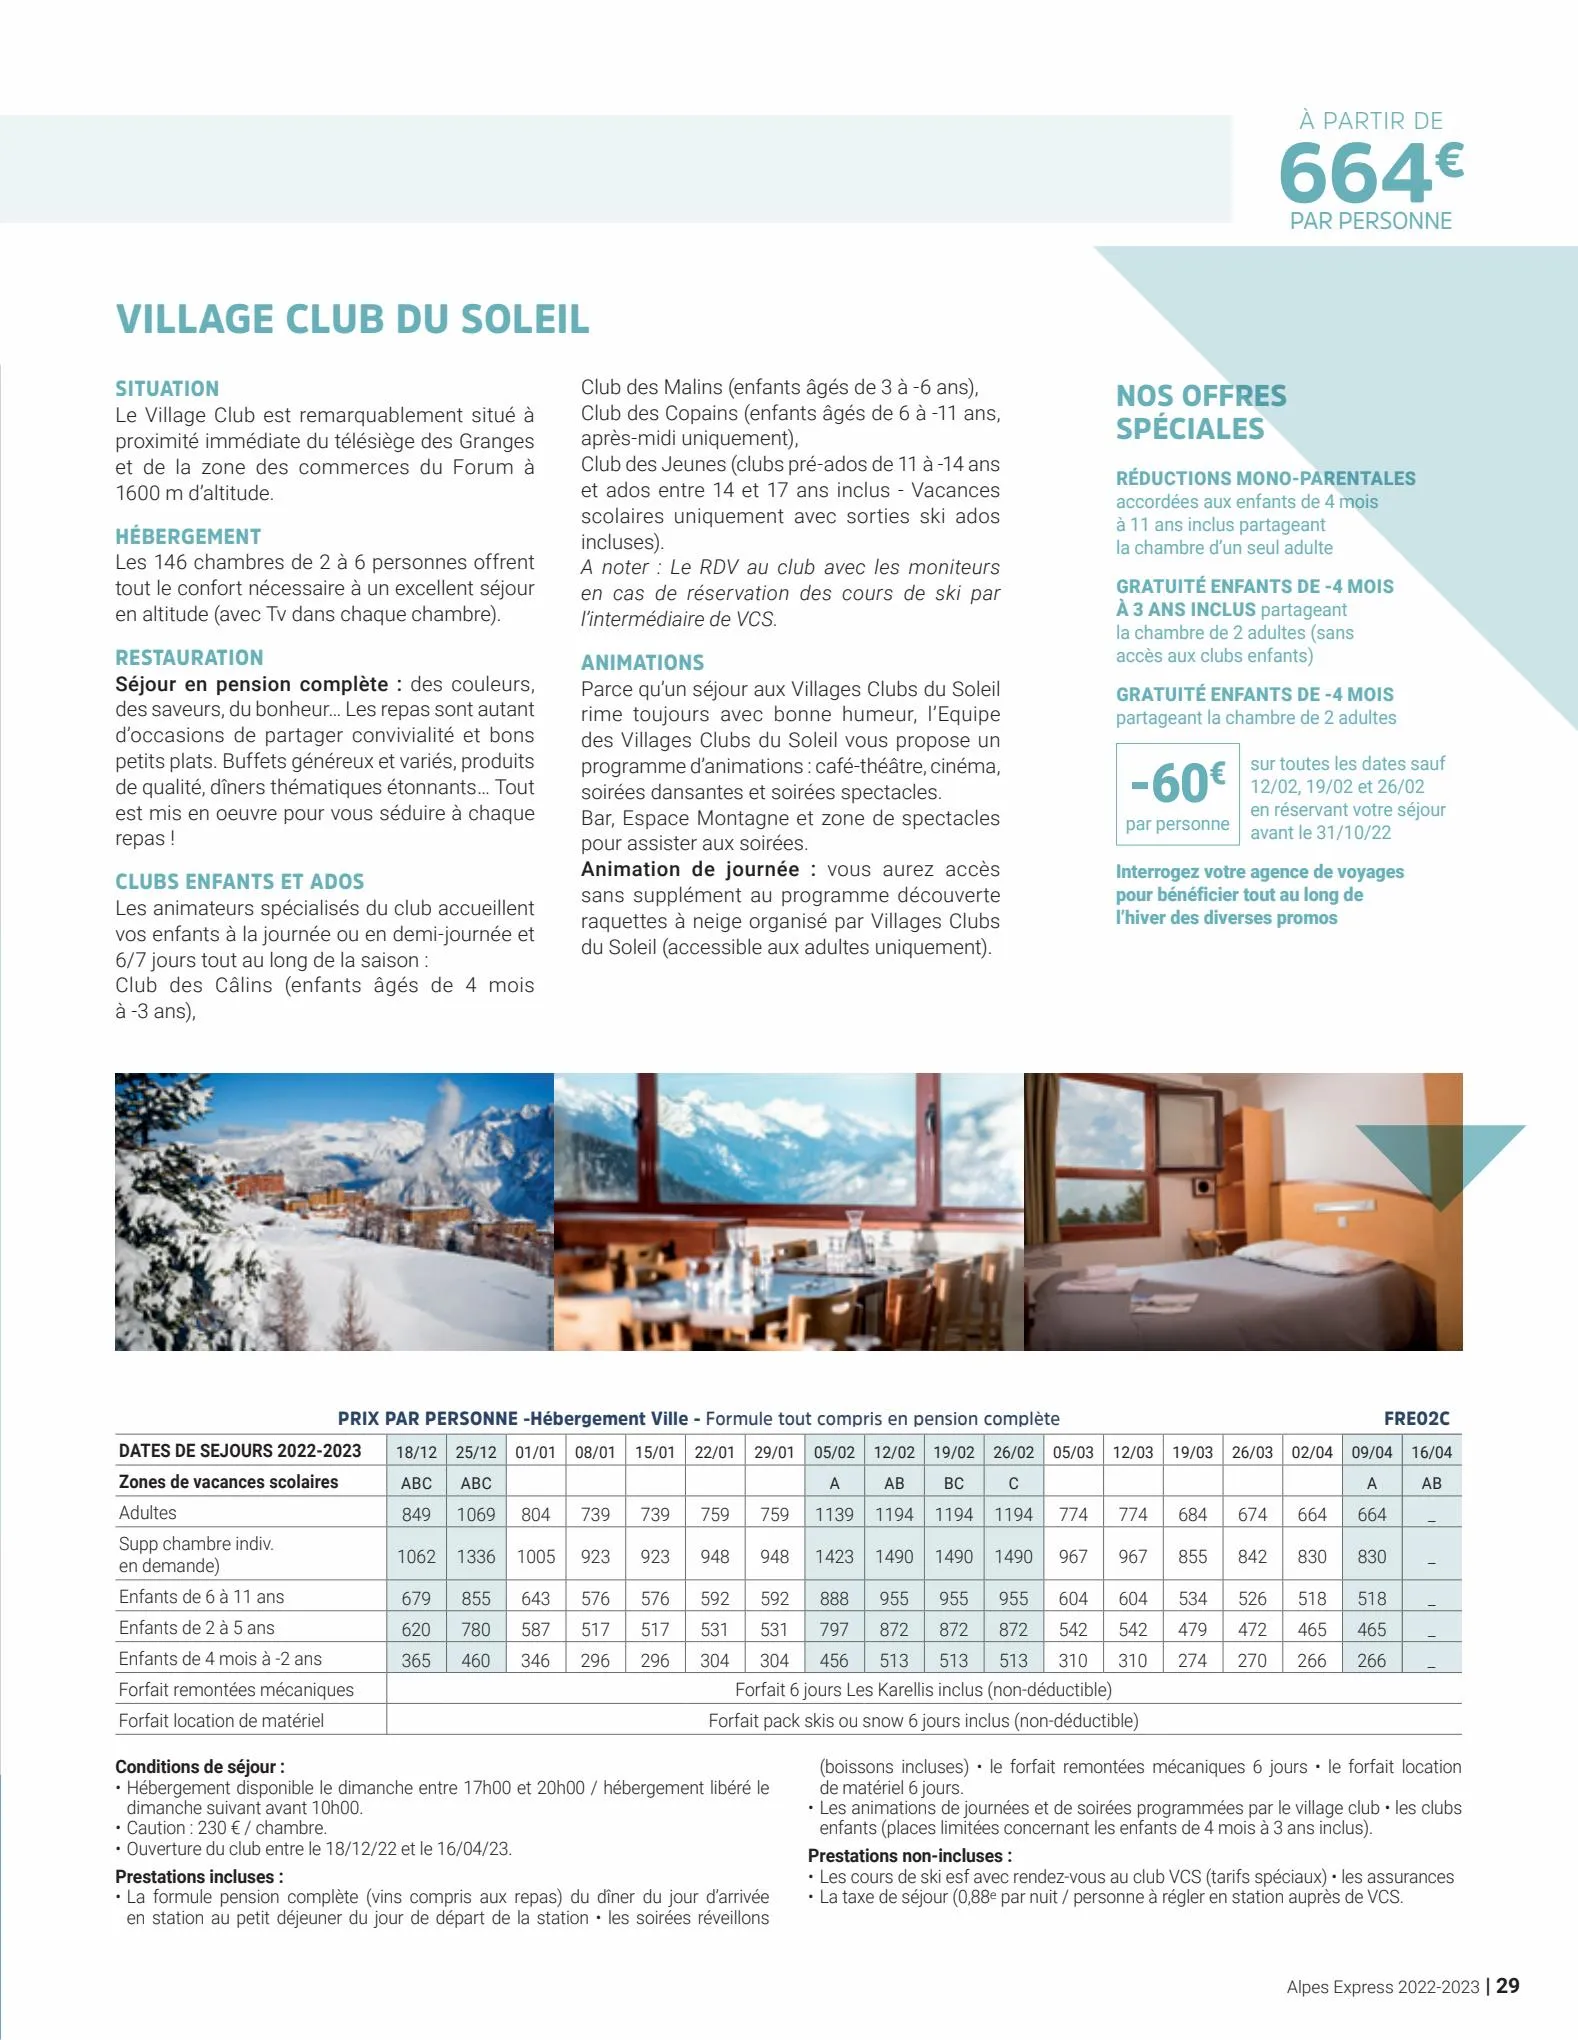 Catalogue Alpes Express - Hiver 2022-2023, page 00029